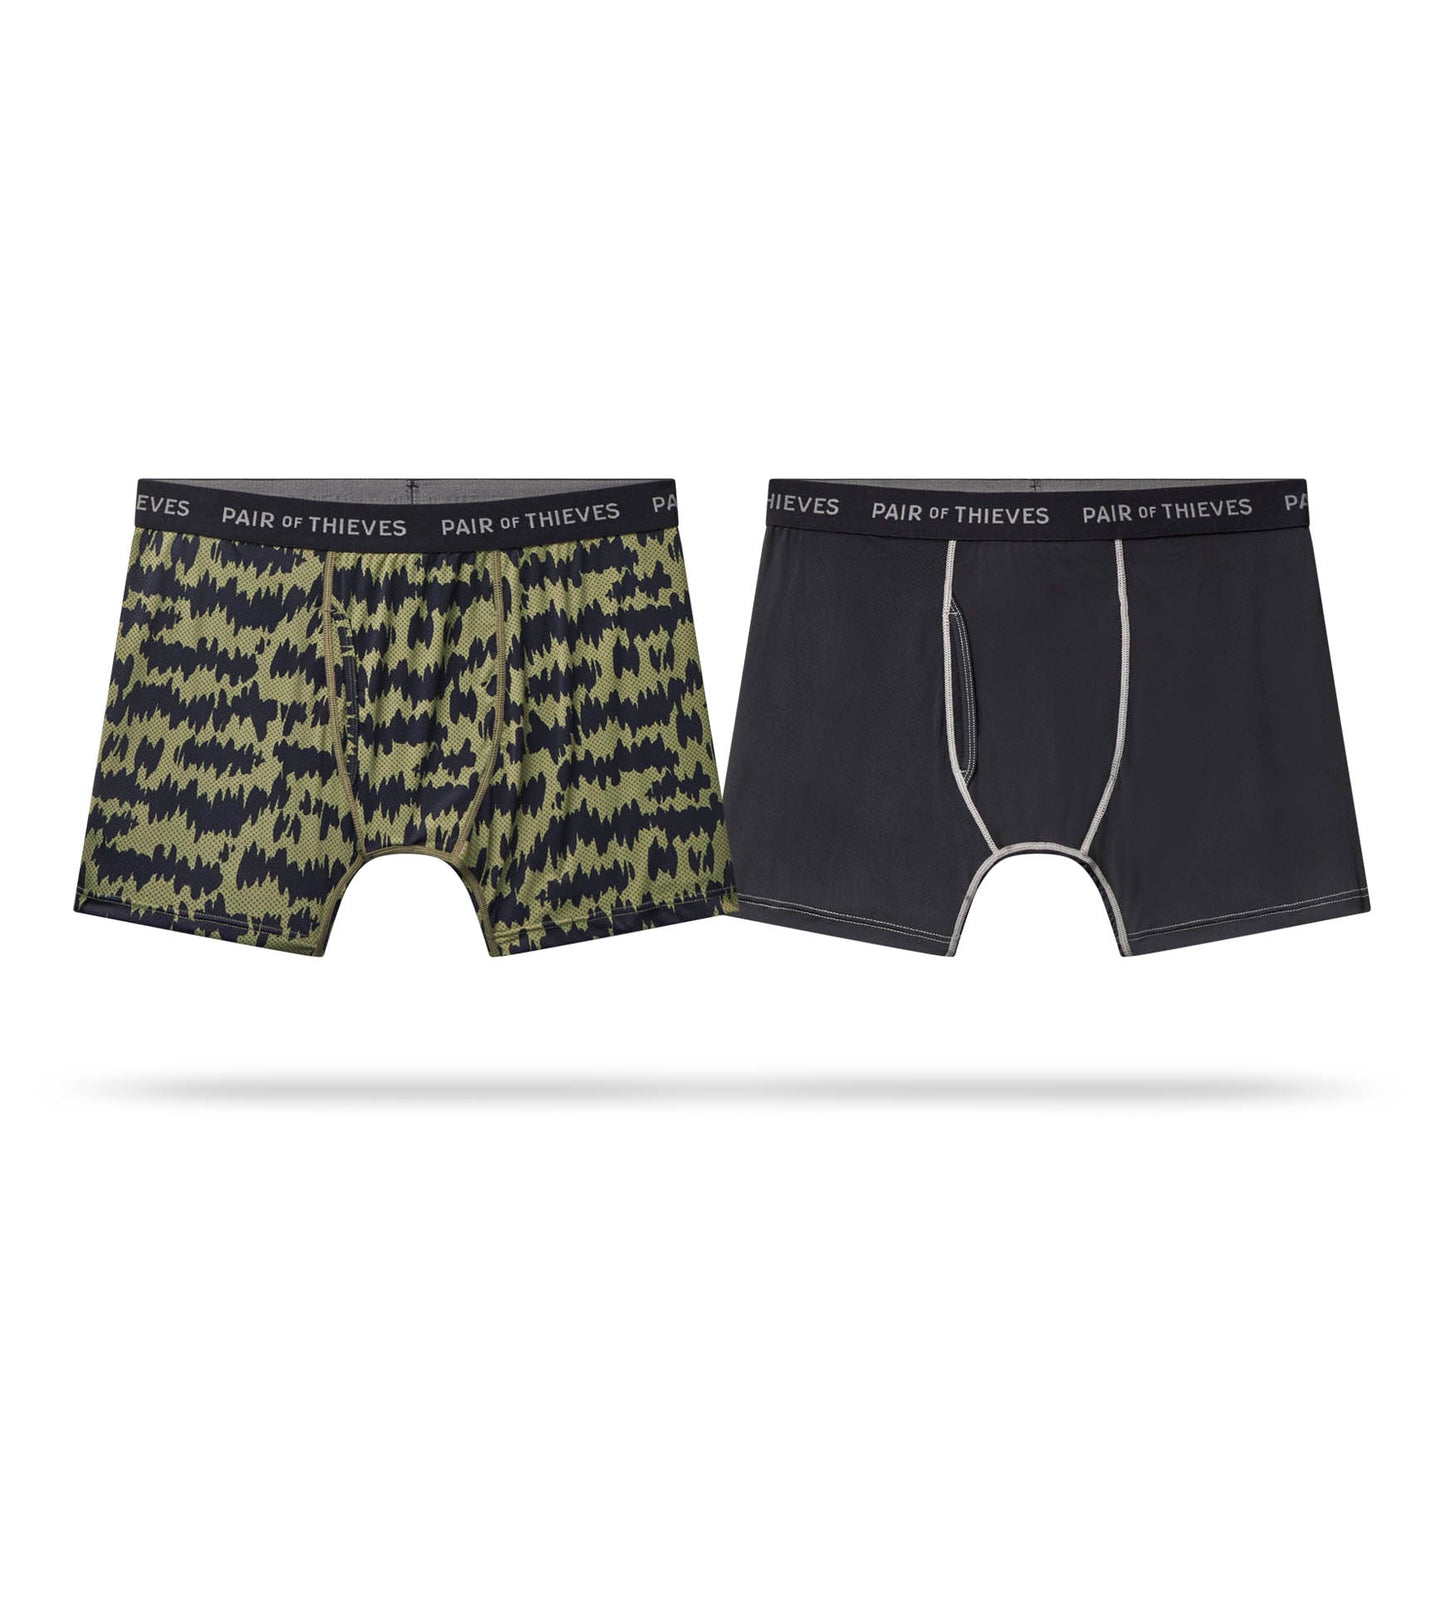 SuperFit Boxer Briefs 2 Pack Seismo Camo - Pair of Thieves